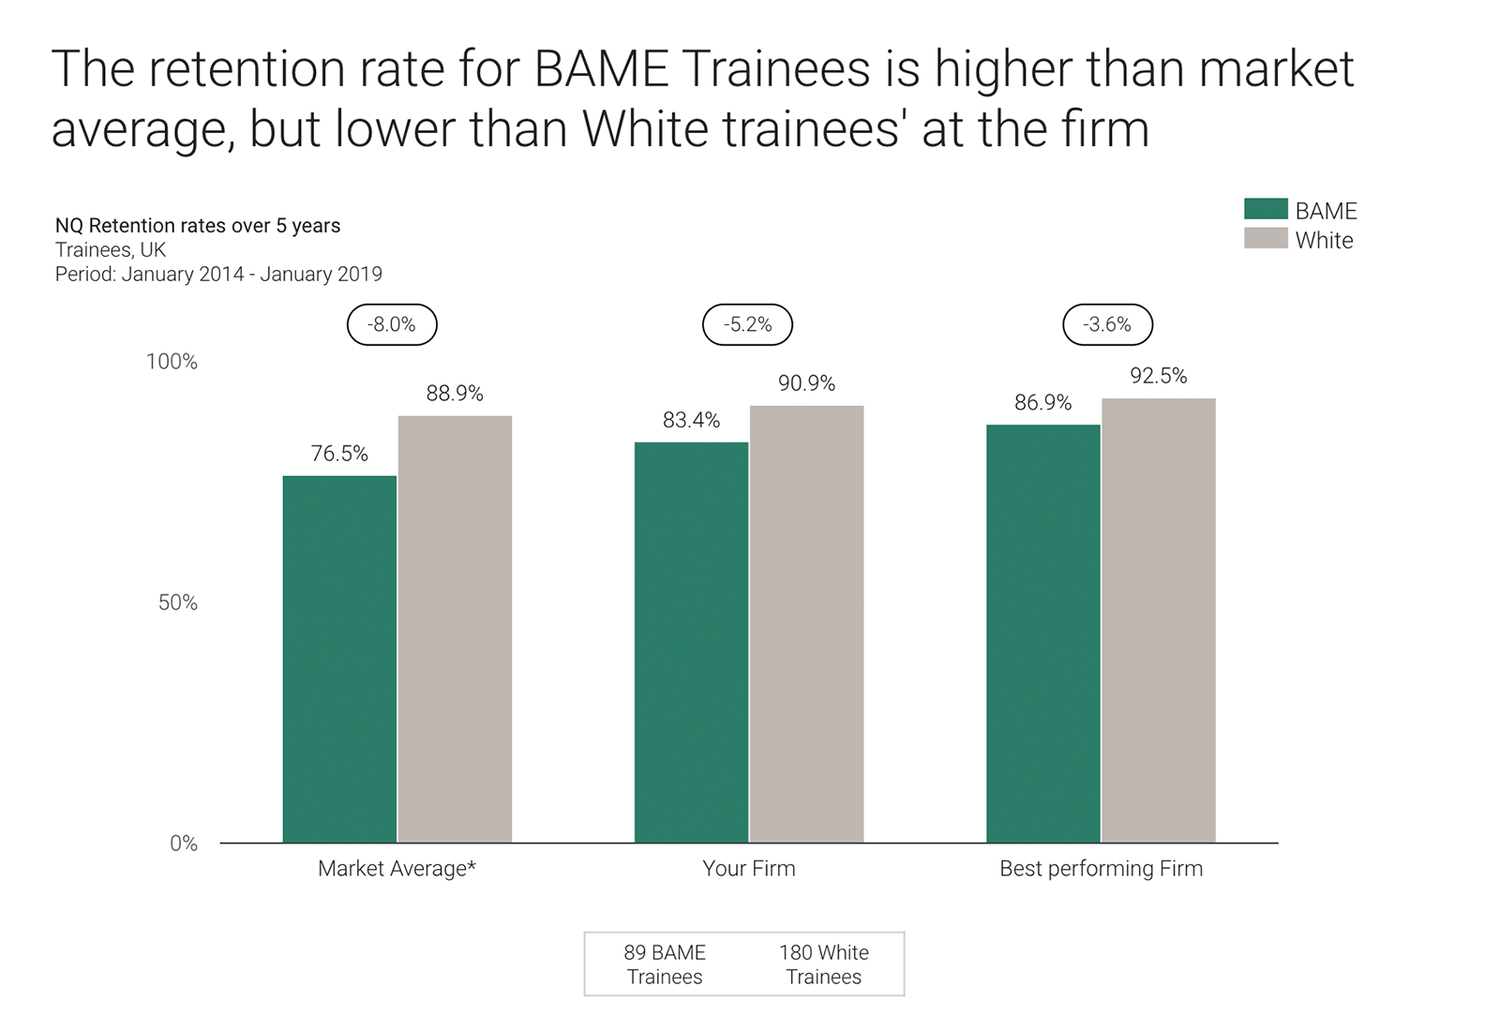 ‘The retention rate for BAME trainees is higher than market average, but lower than White trainees' at the firm.’ Fictional data for illustration only.